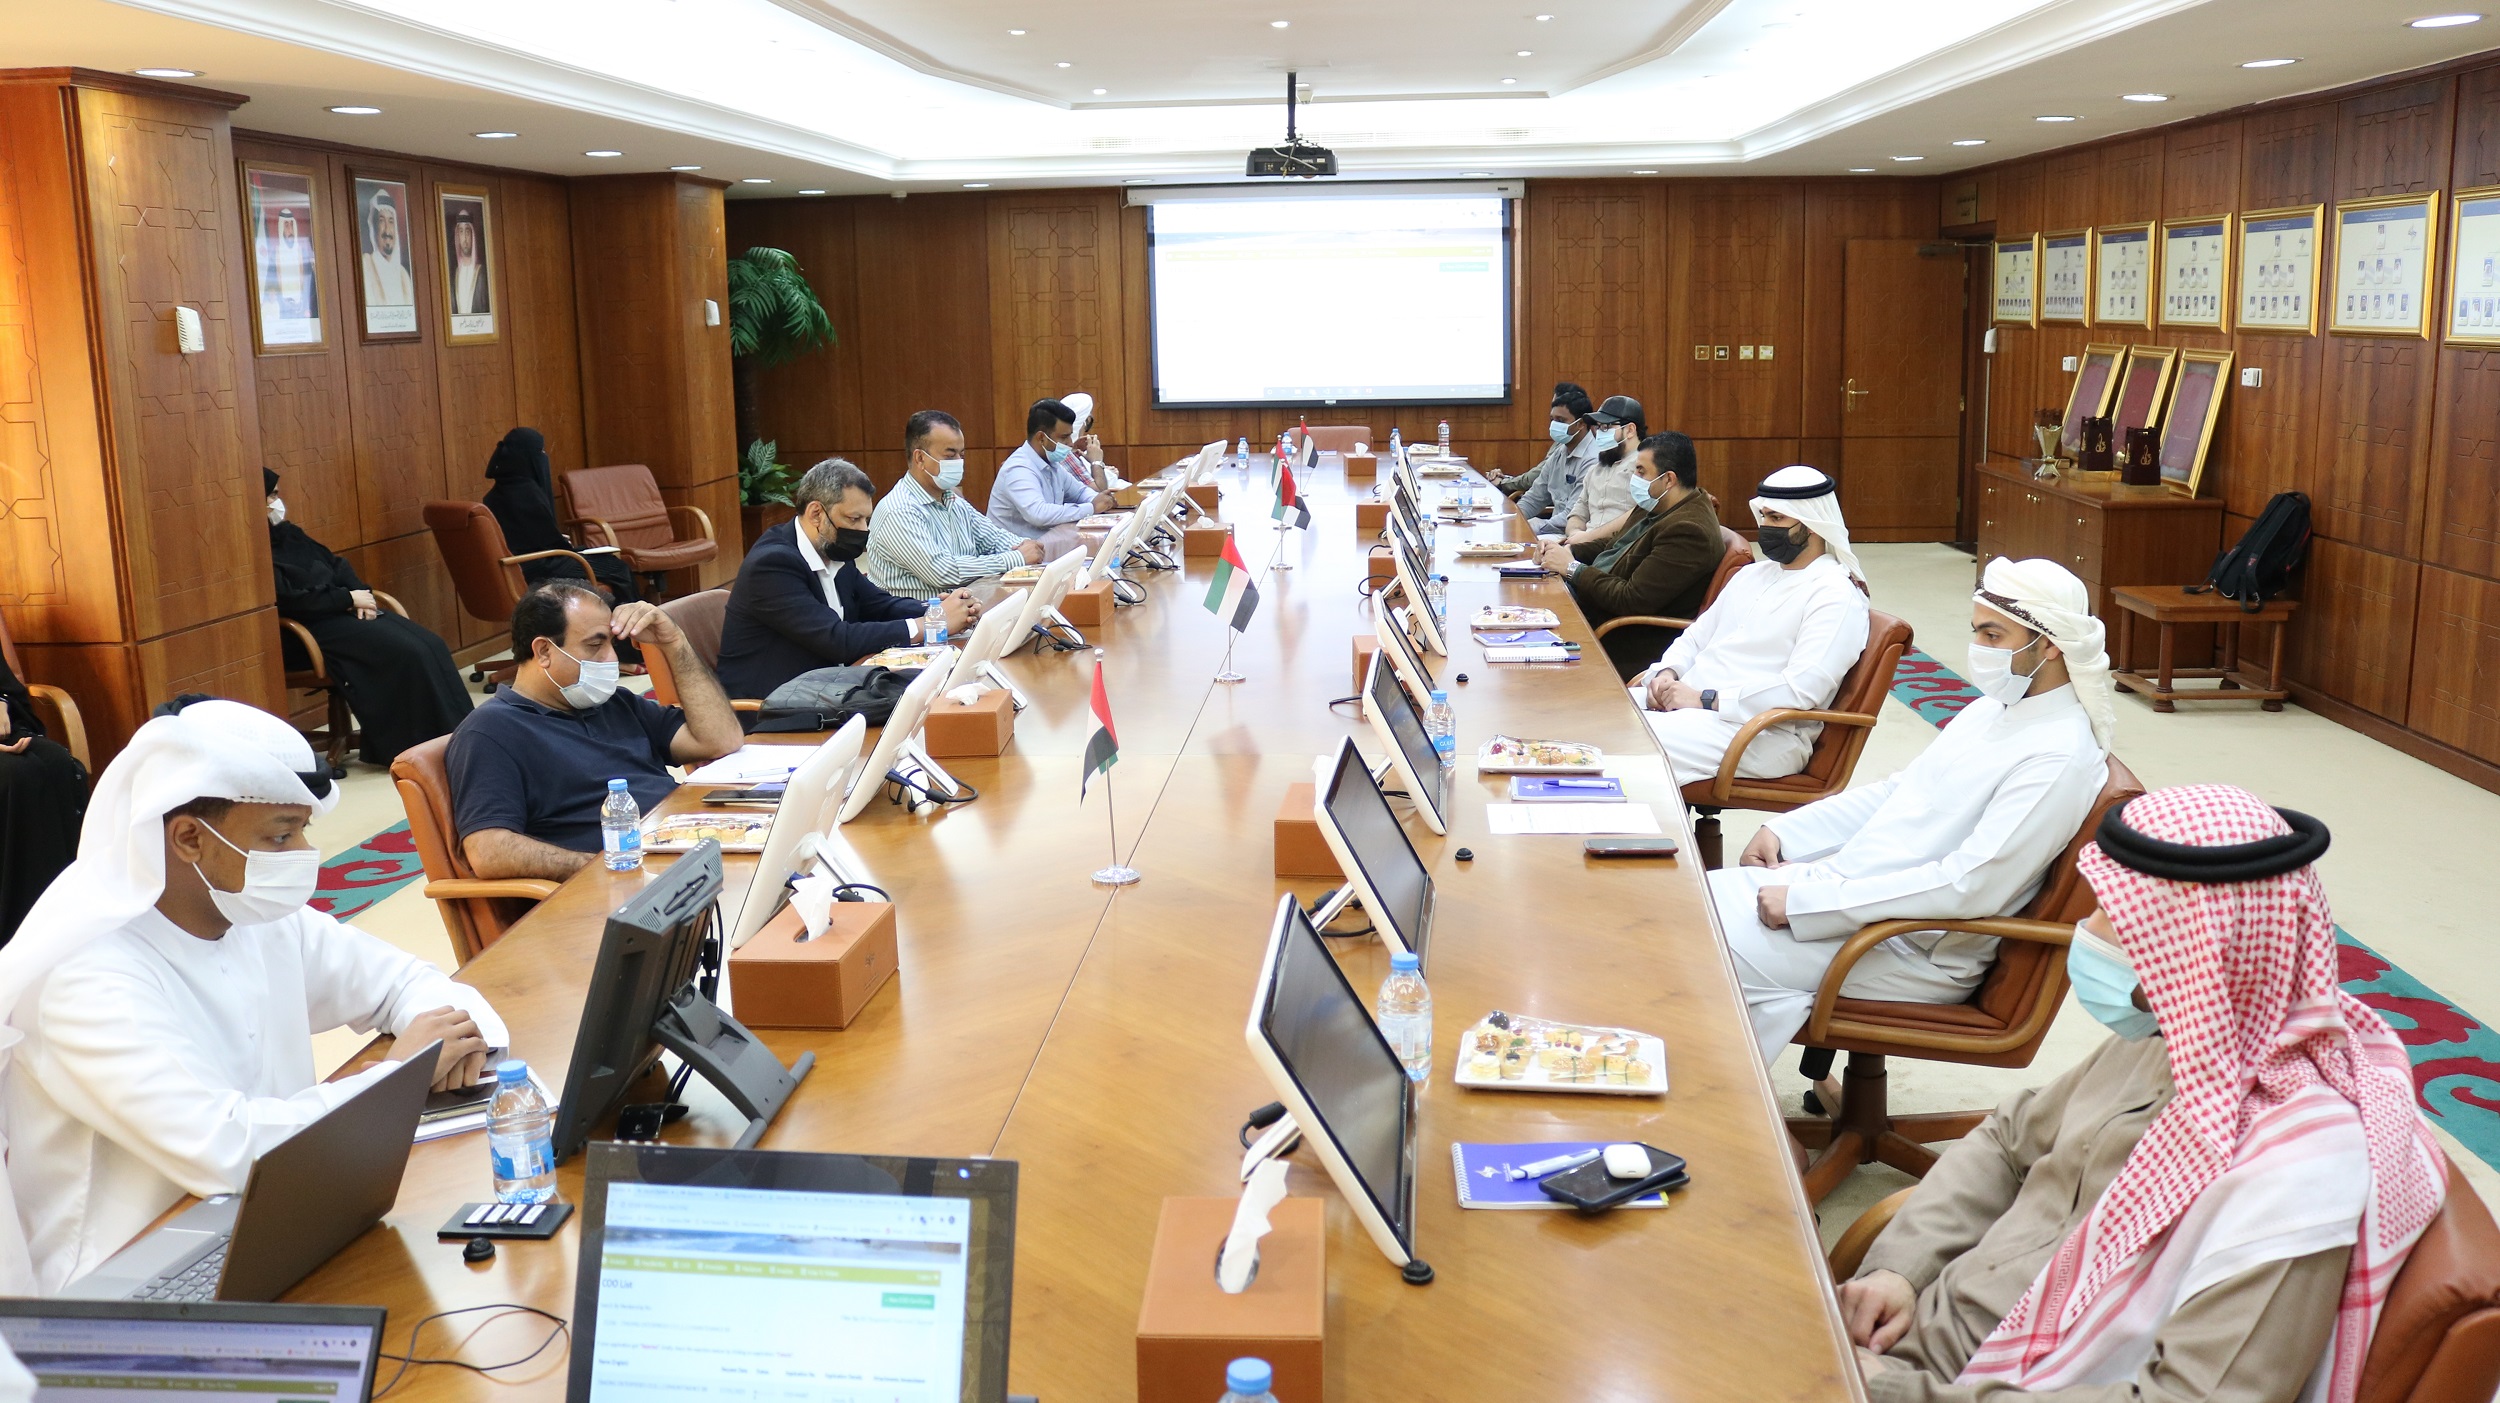 Ajman Chamber organizes an orientation workshop on its electronic services for its customers